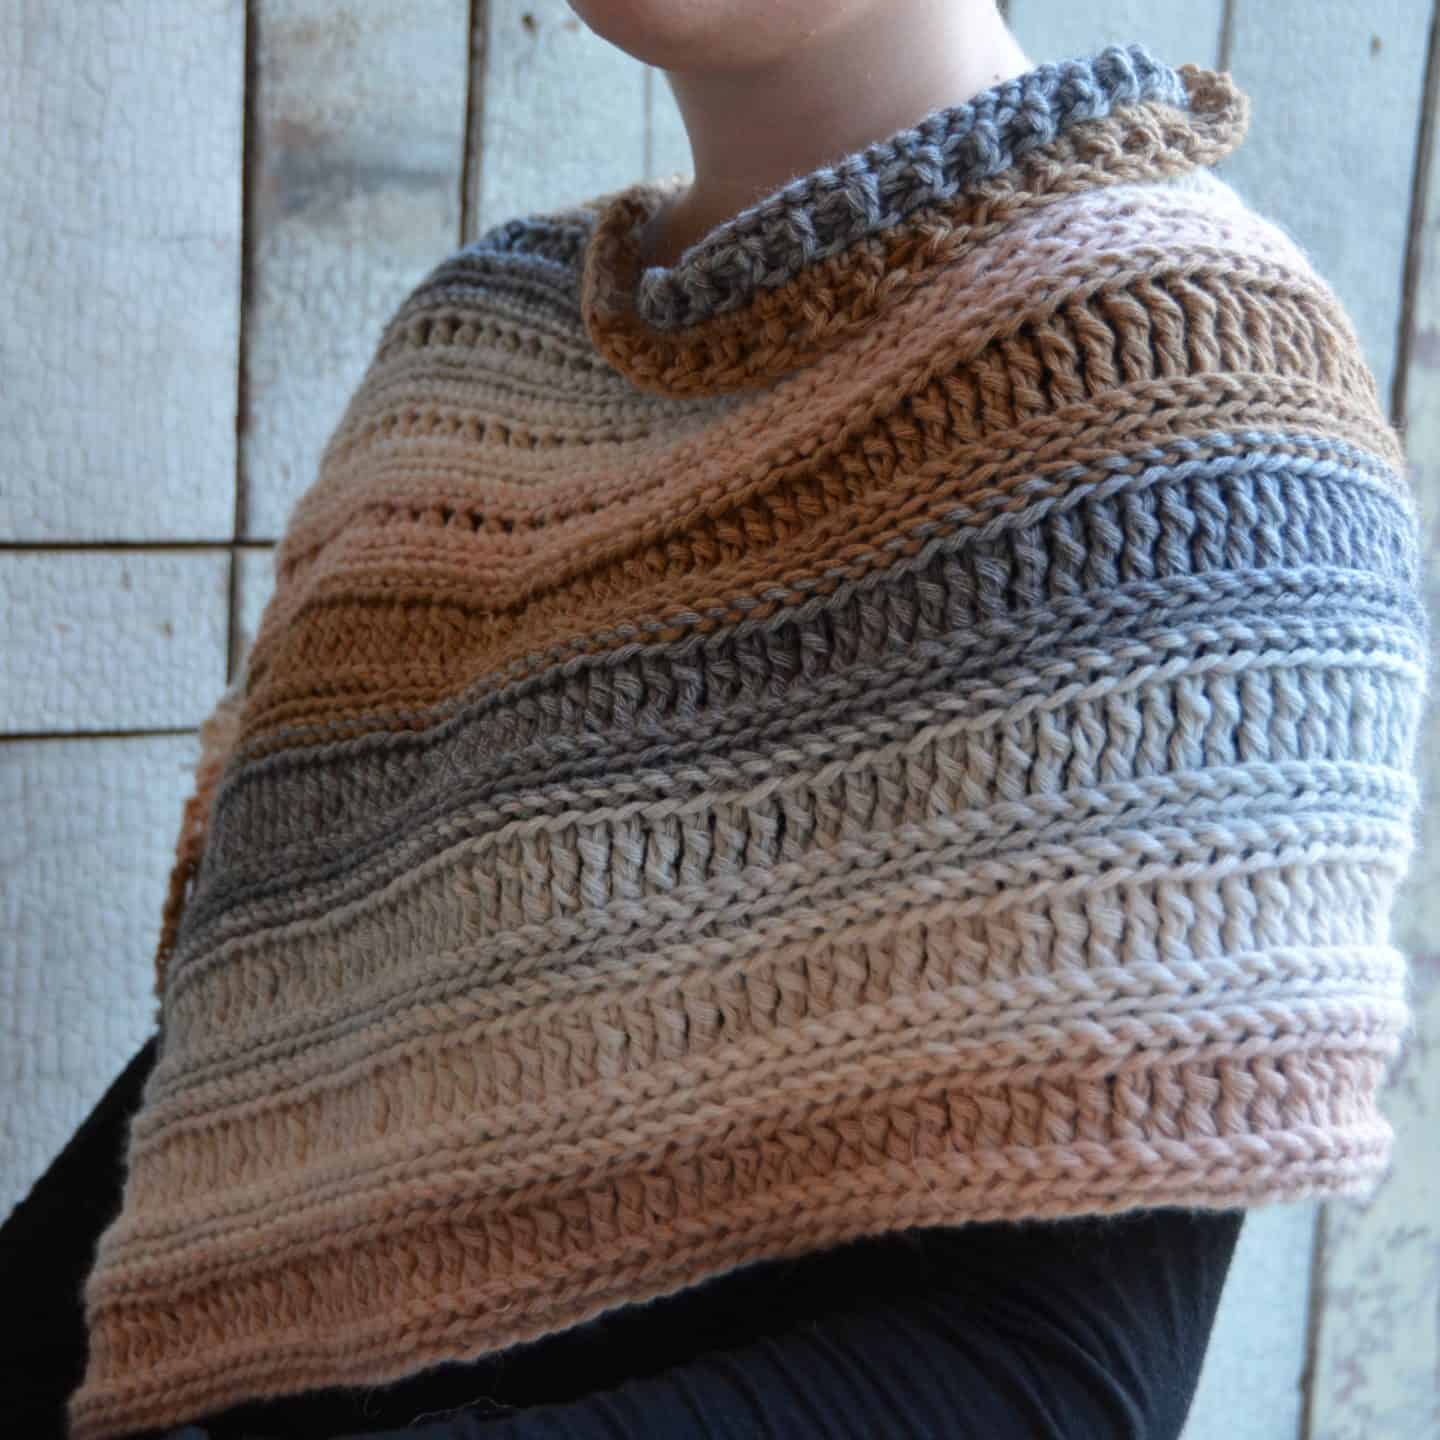 Learn to crochet the Coffee Shop Wrap with a free crochet poncho pattern